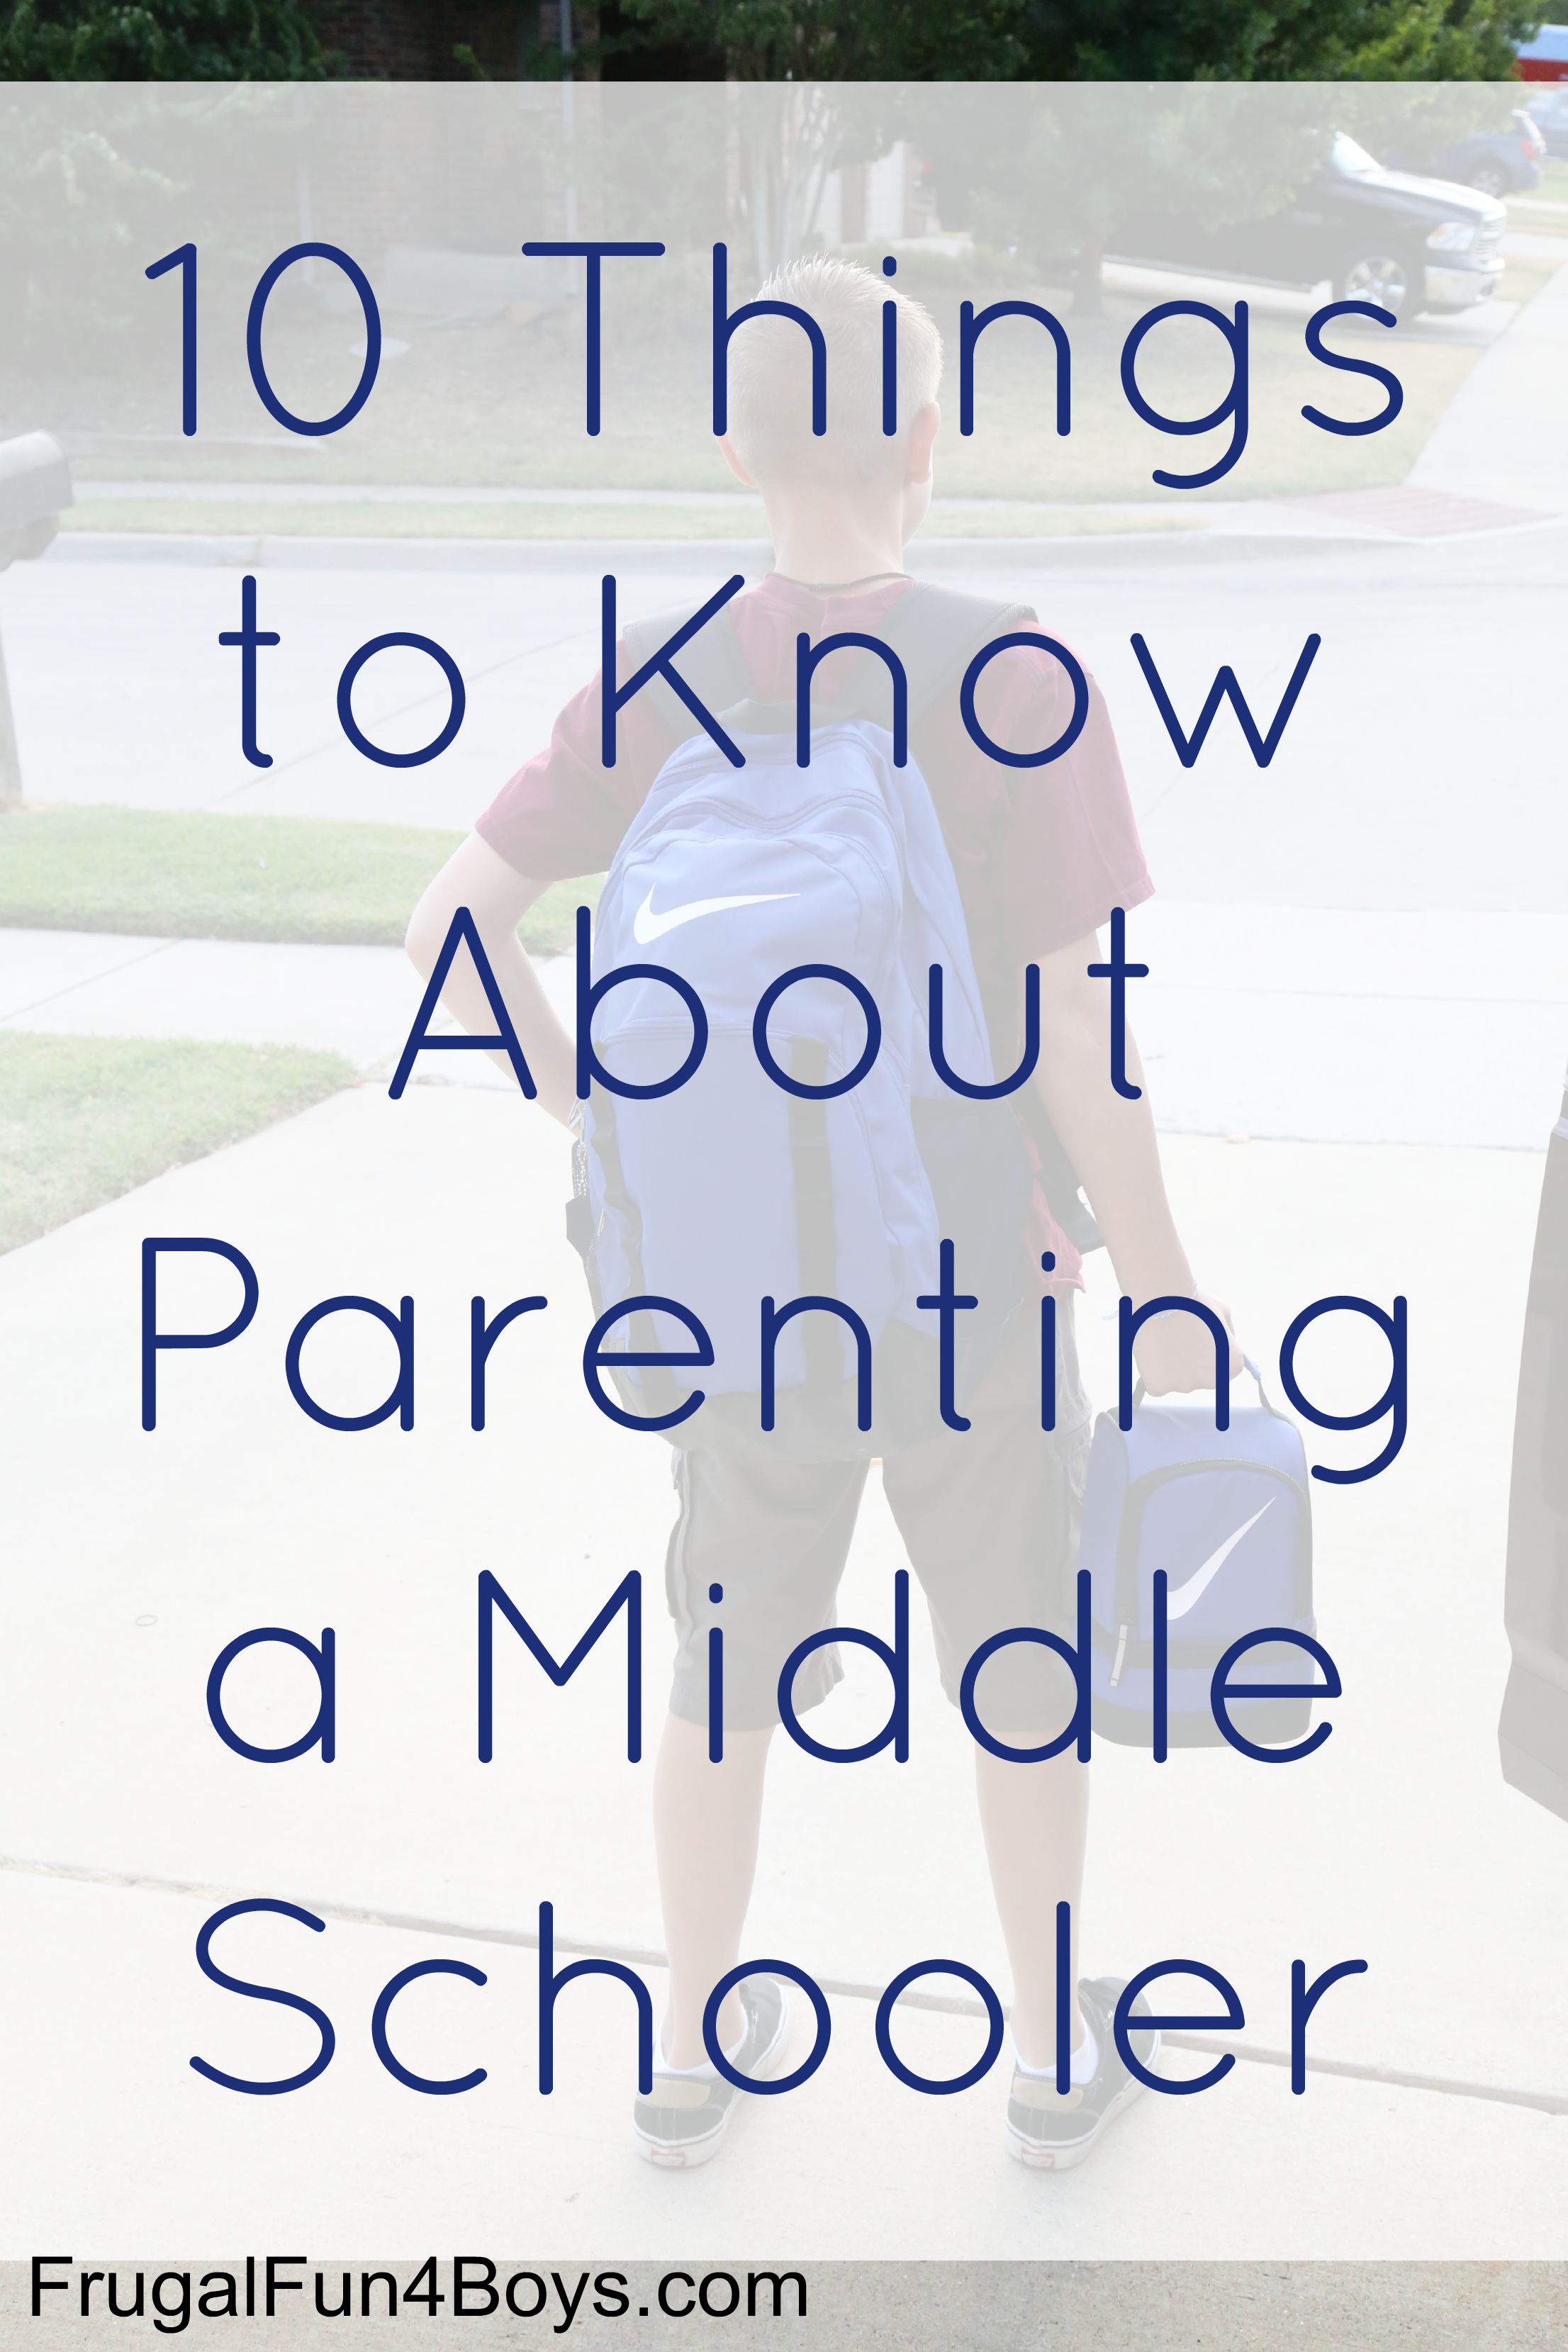 10 Things to Know About Parenting a Middle Schooler